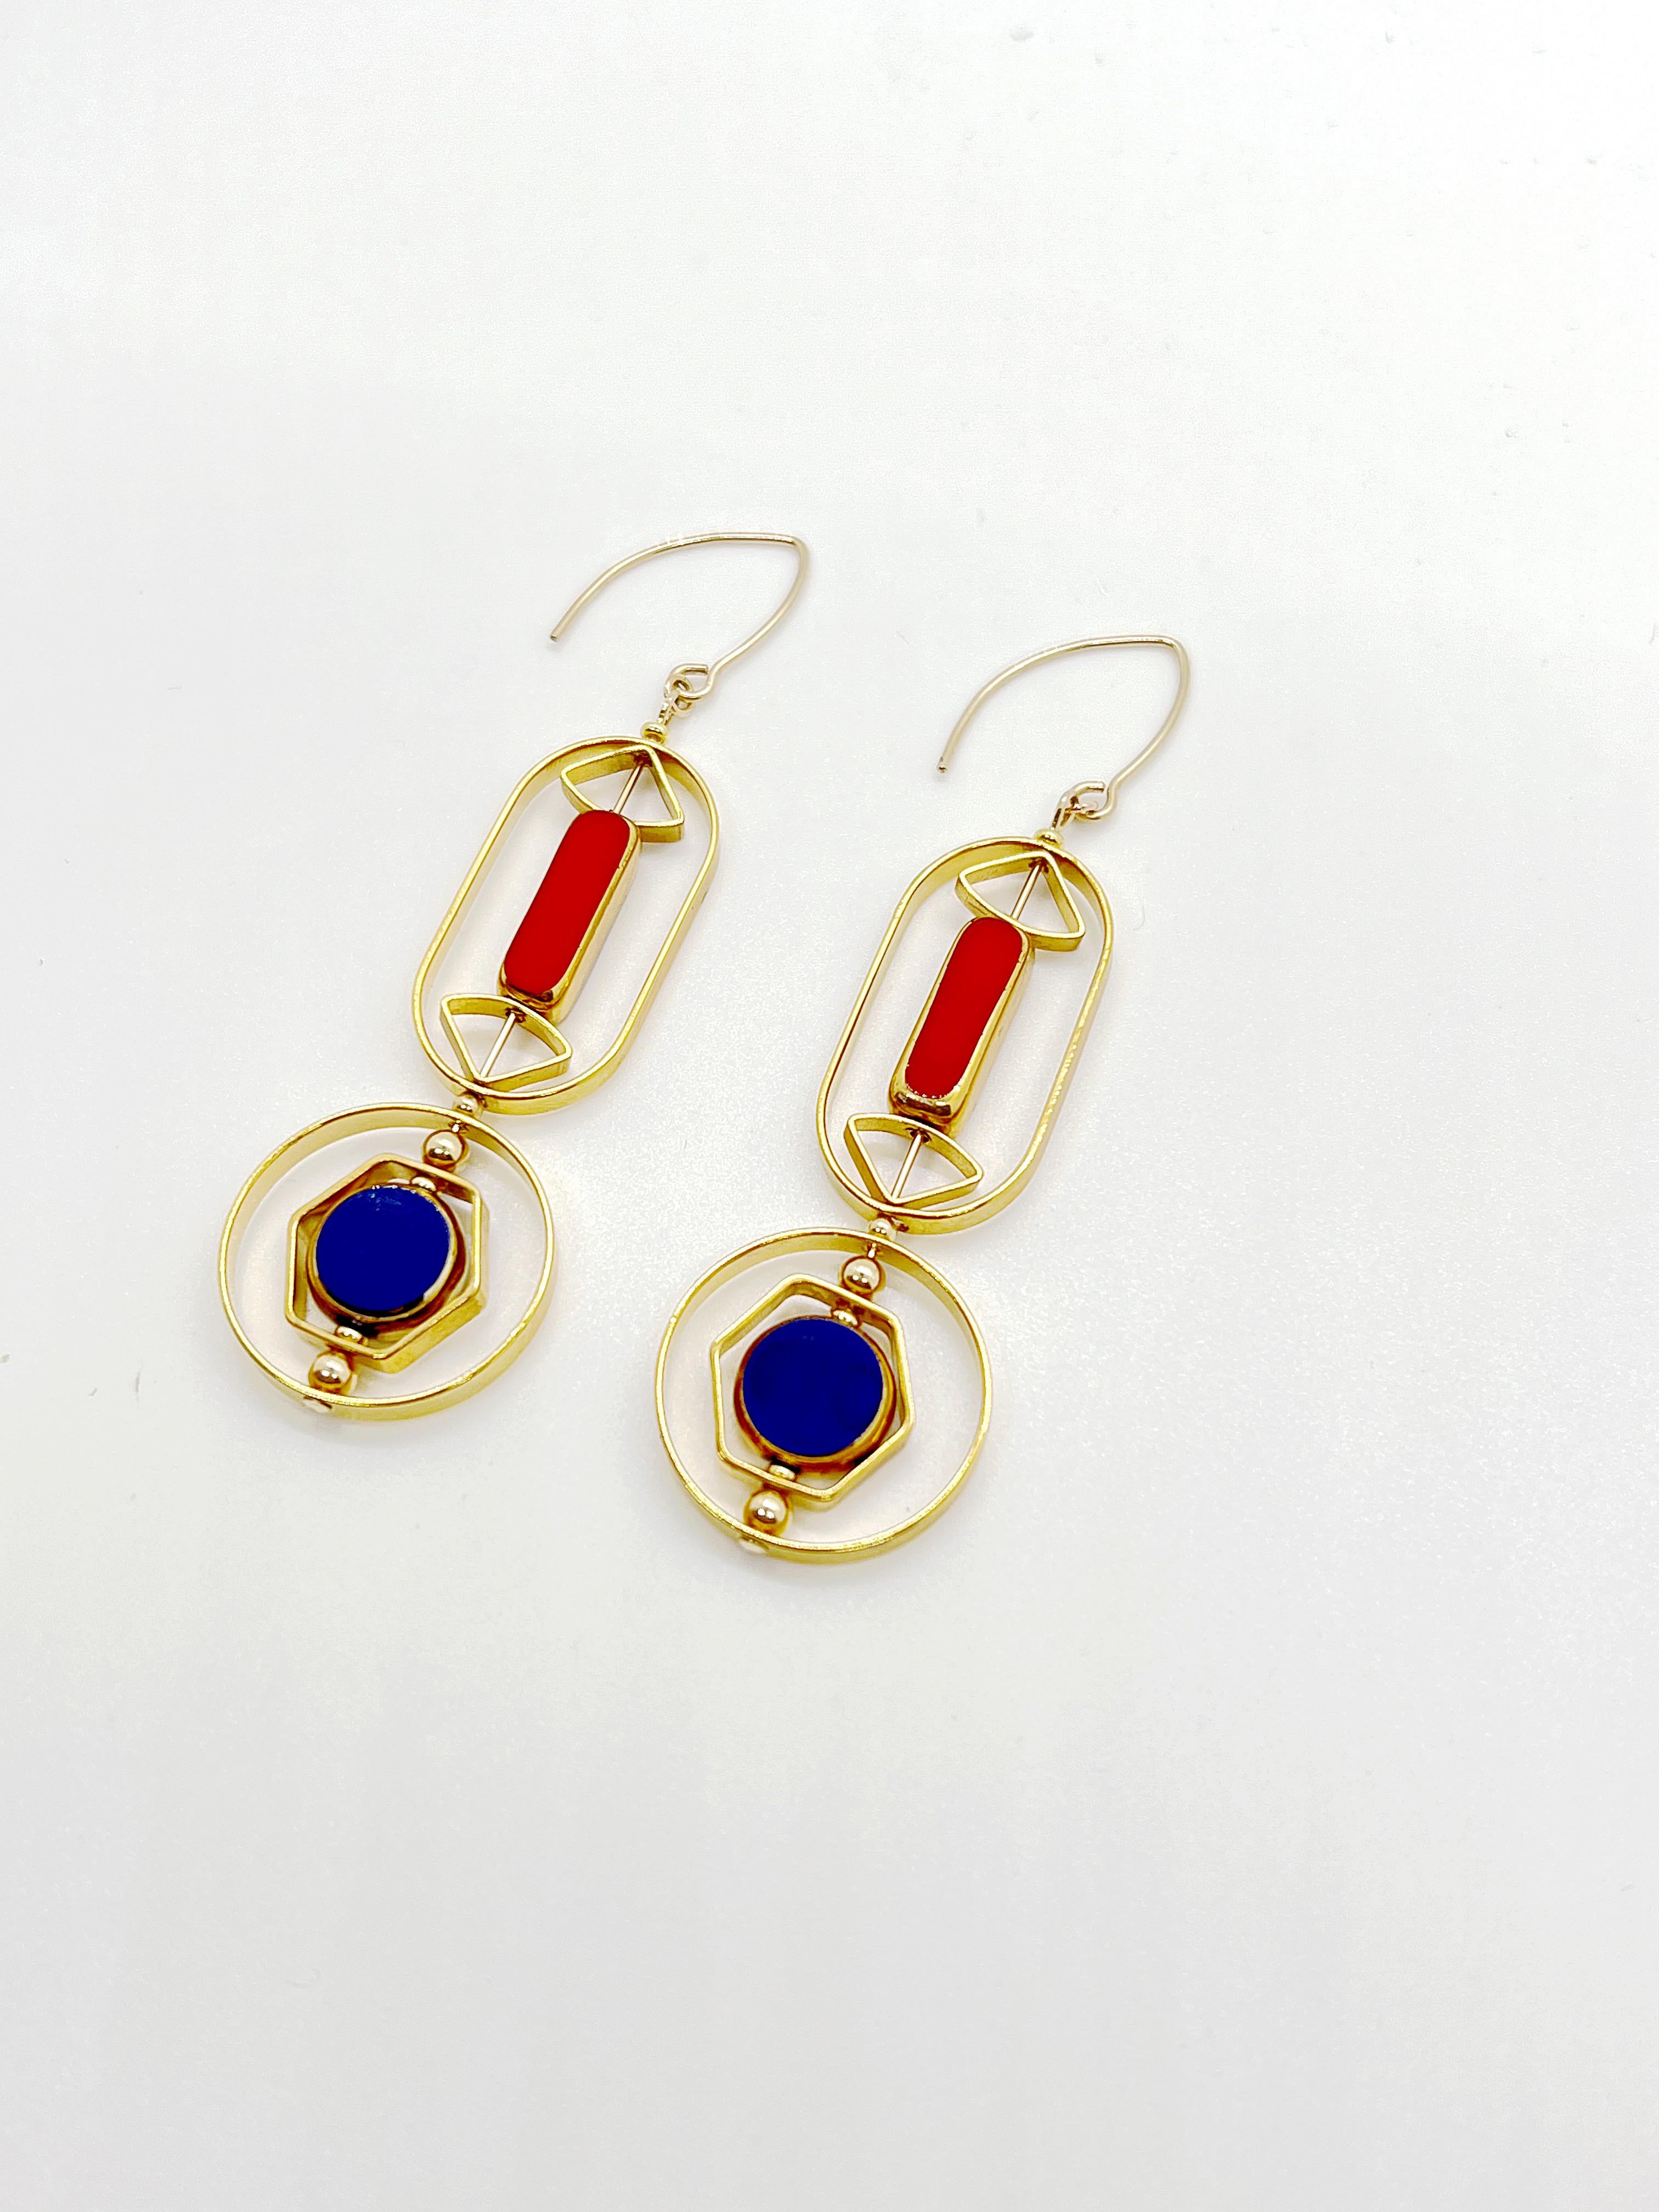 The earrings are light weight and are made to rotate and reposition with movement.

The earrings consist of a red long rectangle and blue circle shaped beads. They are new old stock vintage German glass beads that are framed with 24K gold. The beads